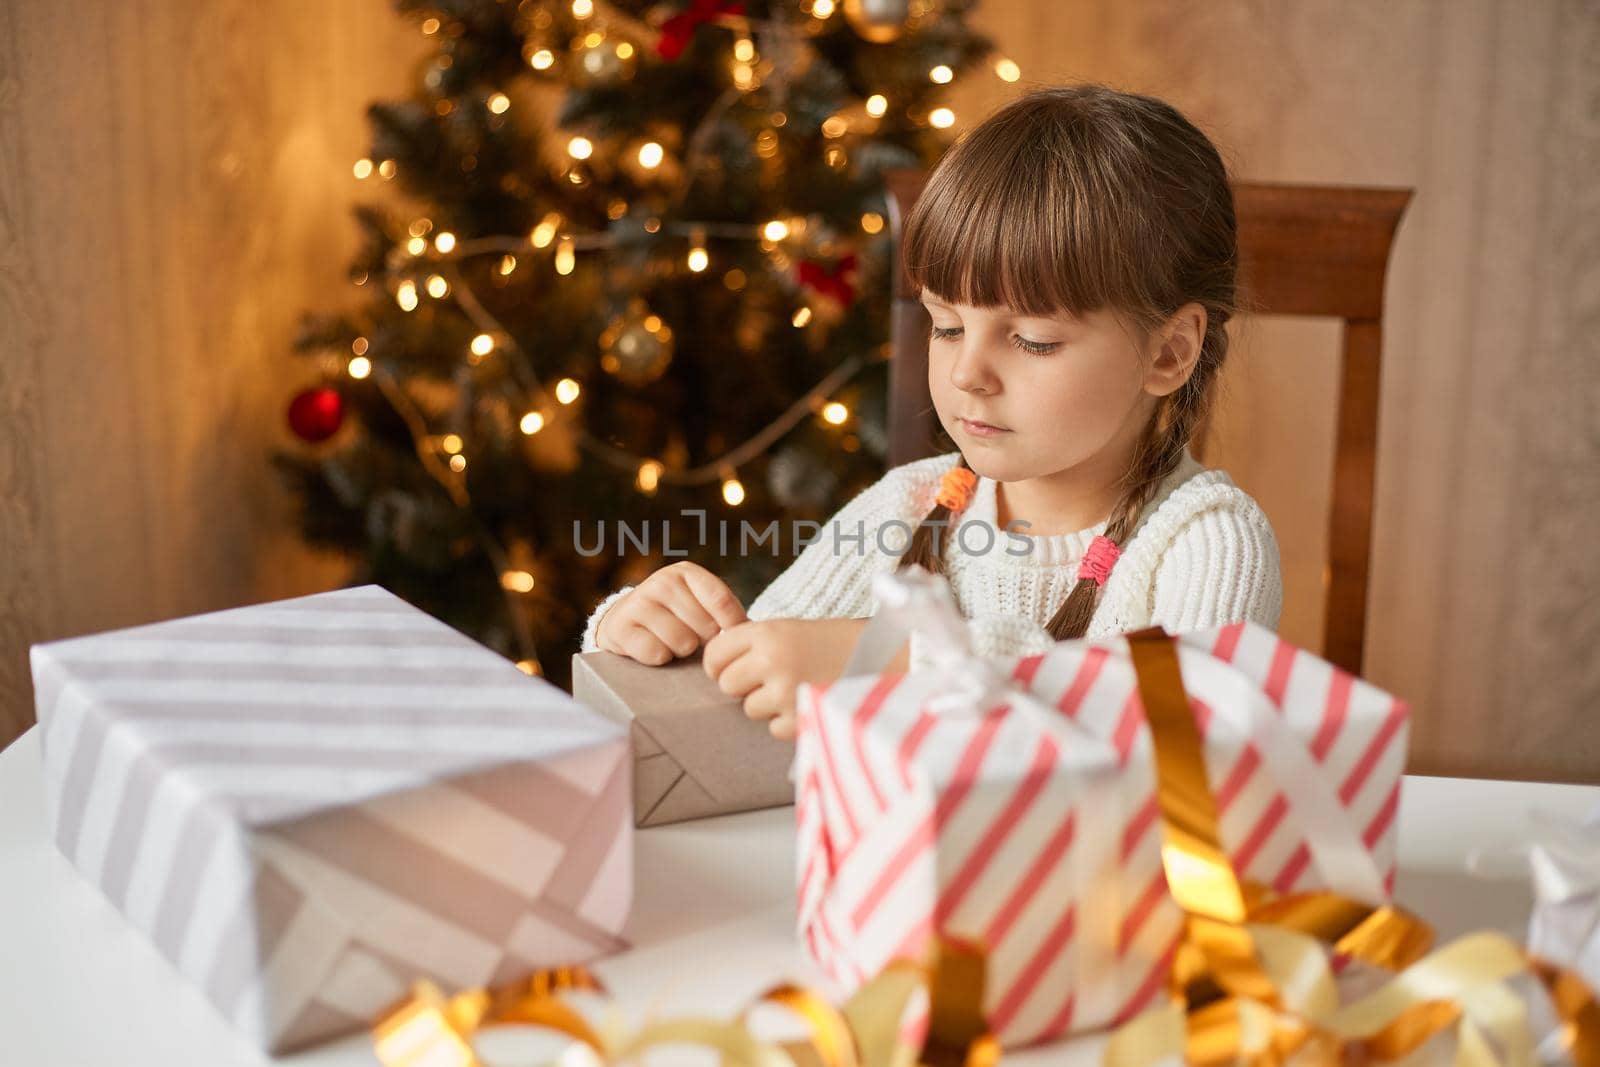 Little concentrated female kid with two pigtails sitting at table and packing christmas box, posing with xmas tree on background, child with concentrated look, making surprise for family.